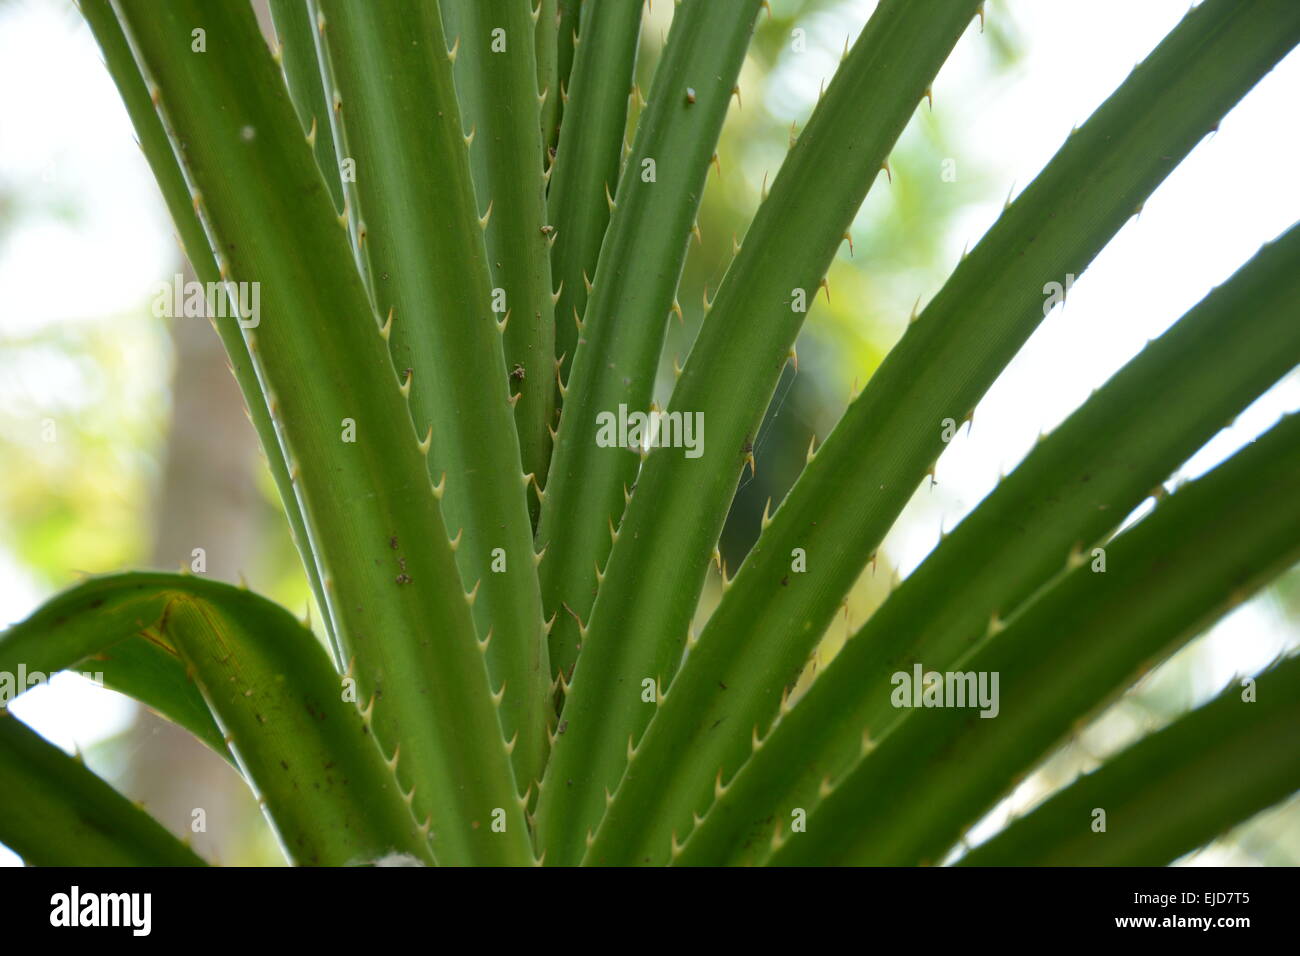 Green leaves with spines Stock Photo